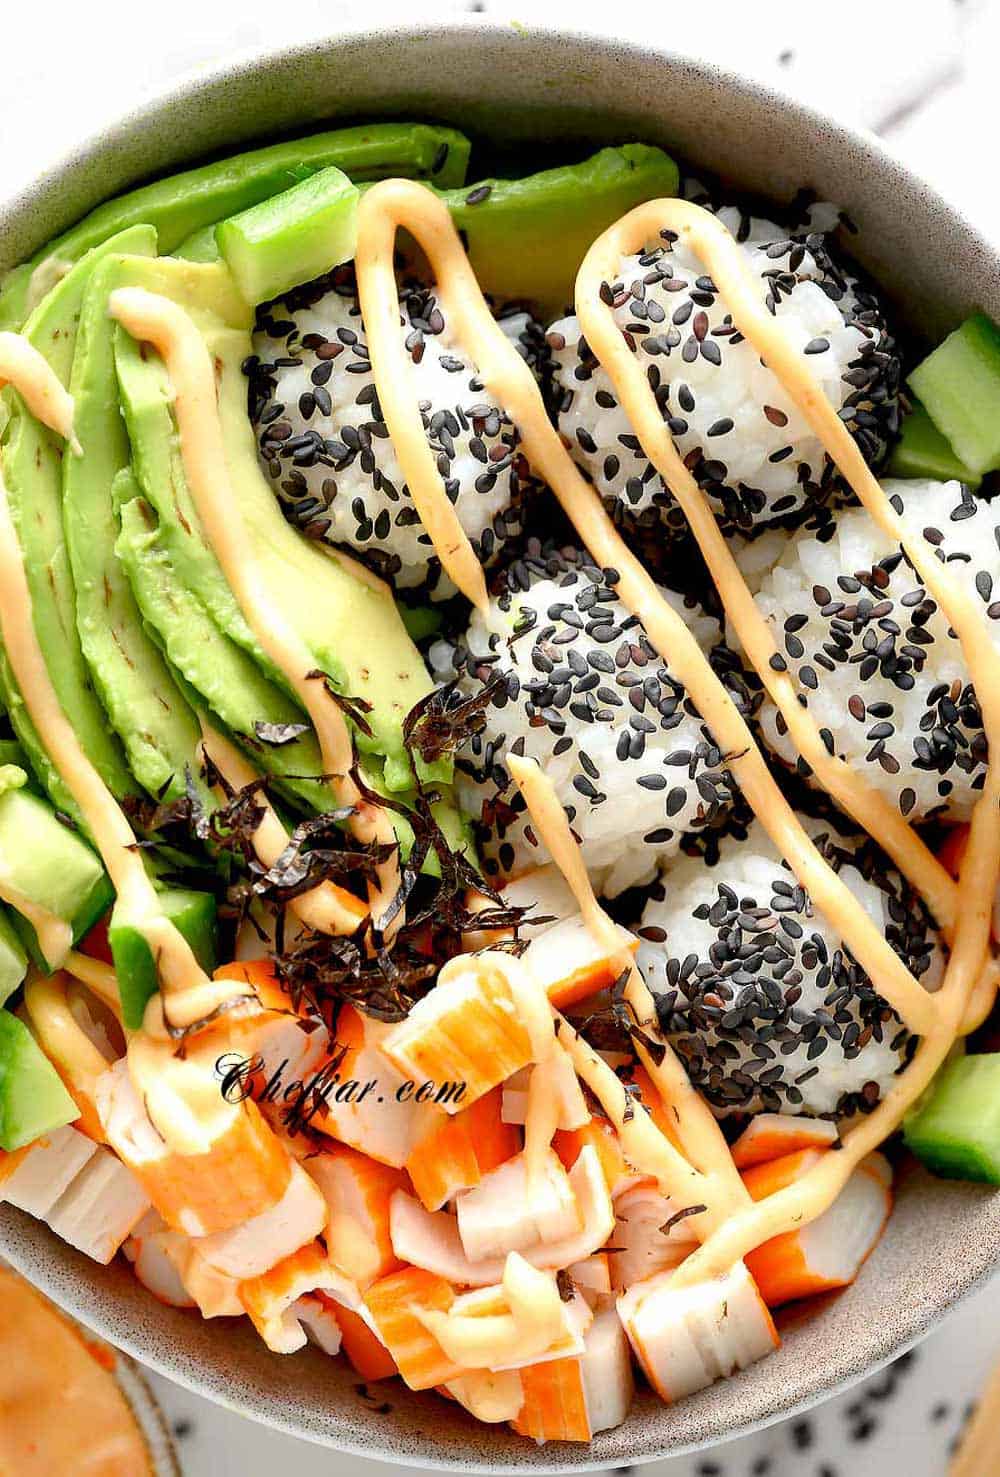 California Sushi Bowl with black sesame seeds, spicy mayo and chopsticks nearby